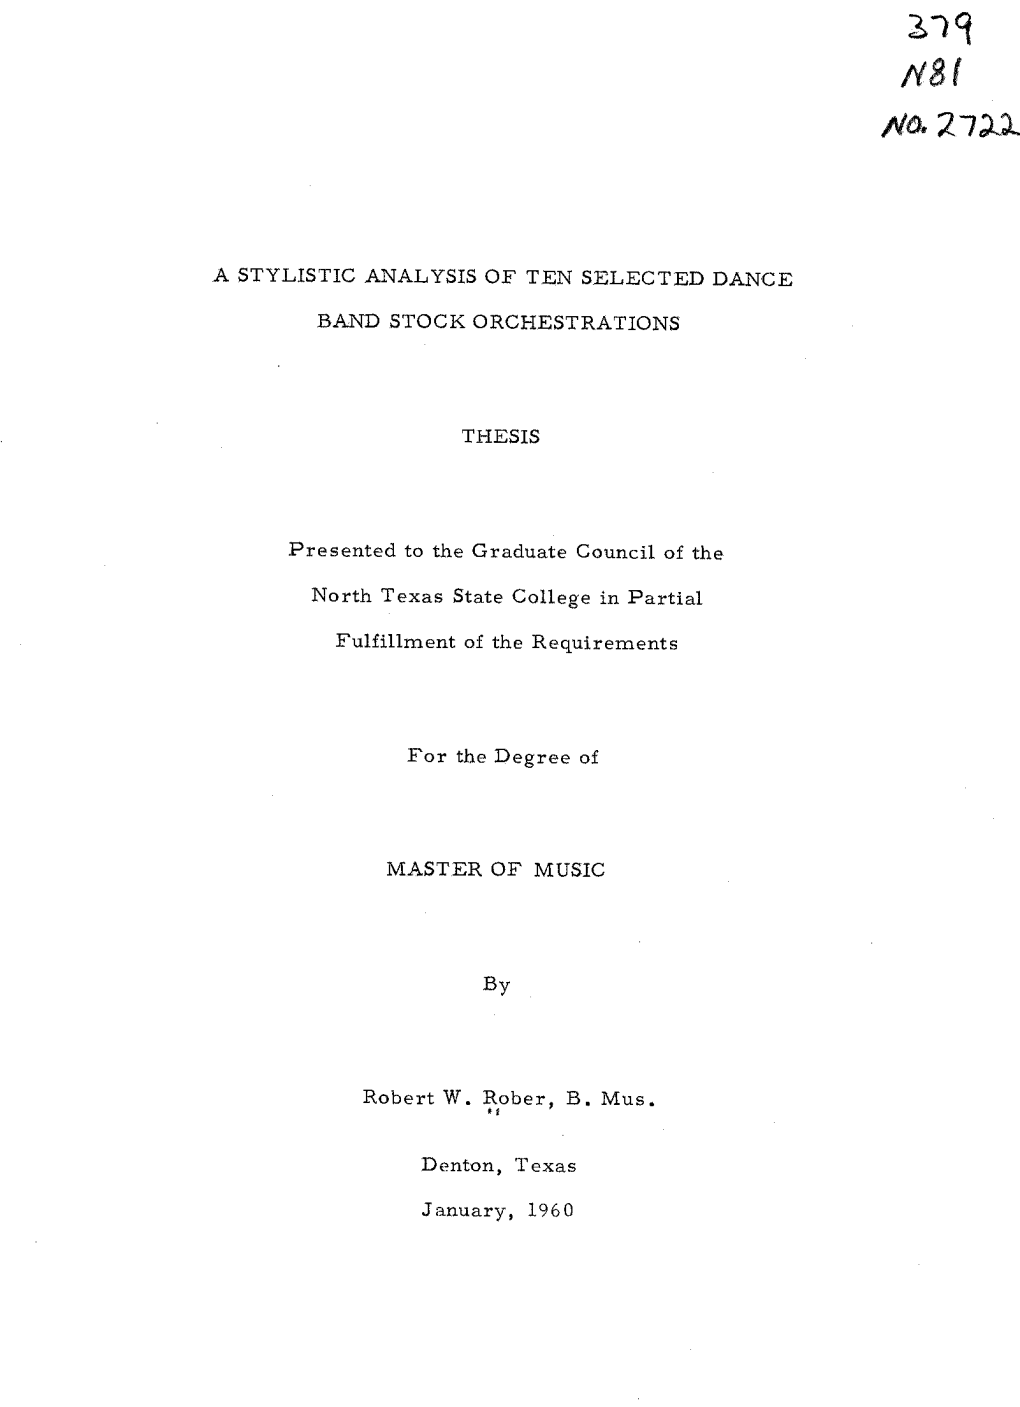 A Stylistic Analysis of Ten Selected Dance Band Stock